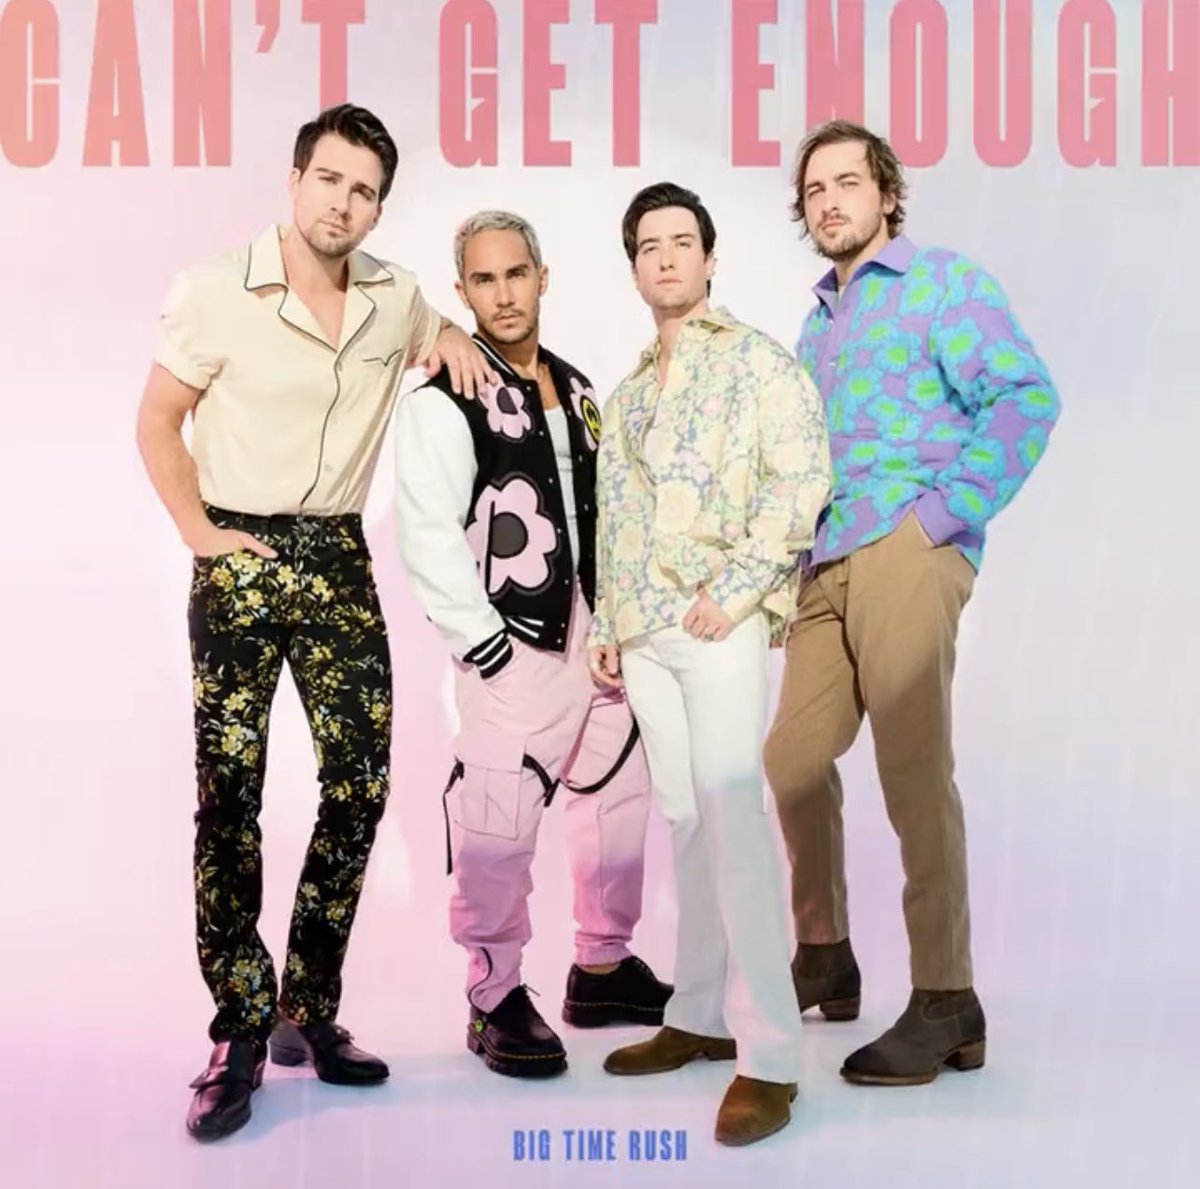 Big Time Rush’s new single, “CAN’T GET ENOUGH” is coming out on February 6th.

Pre-save: BigTimeRush.lnk.to/CantGetEnough